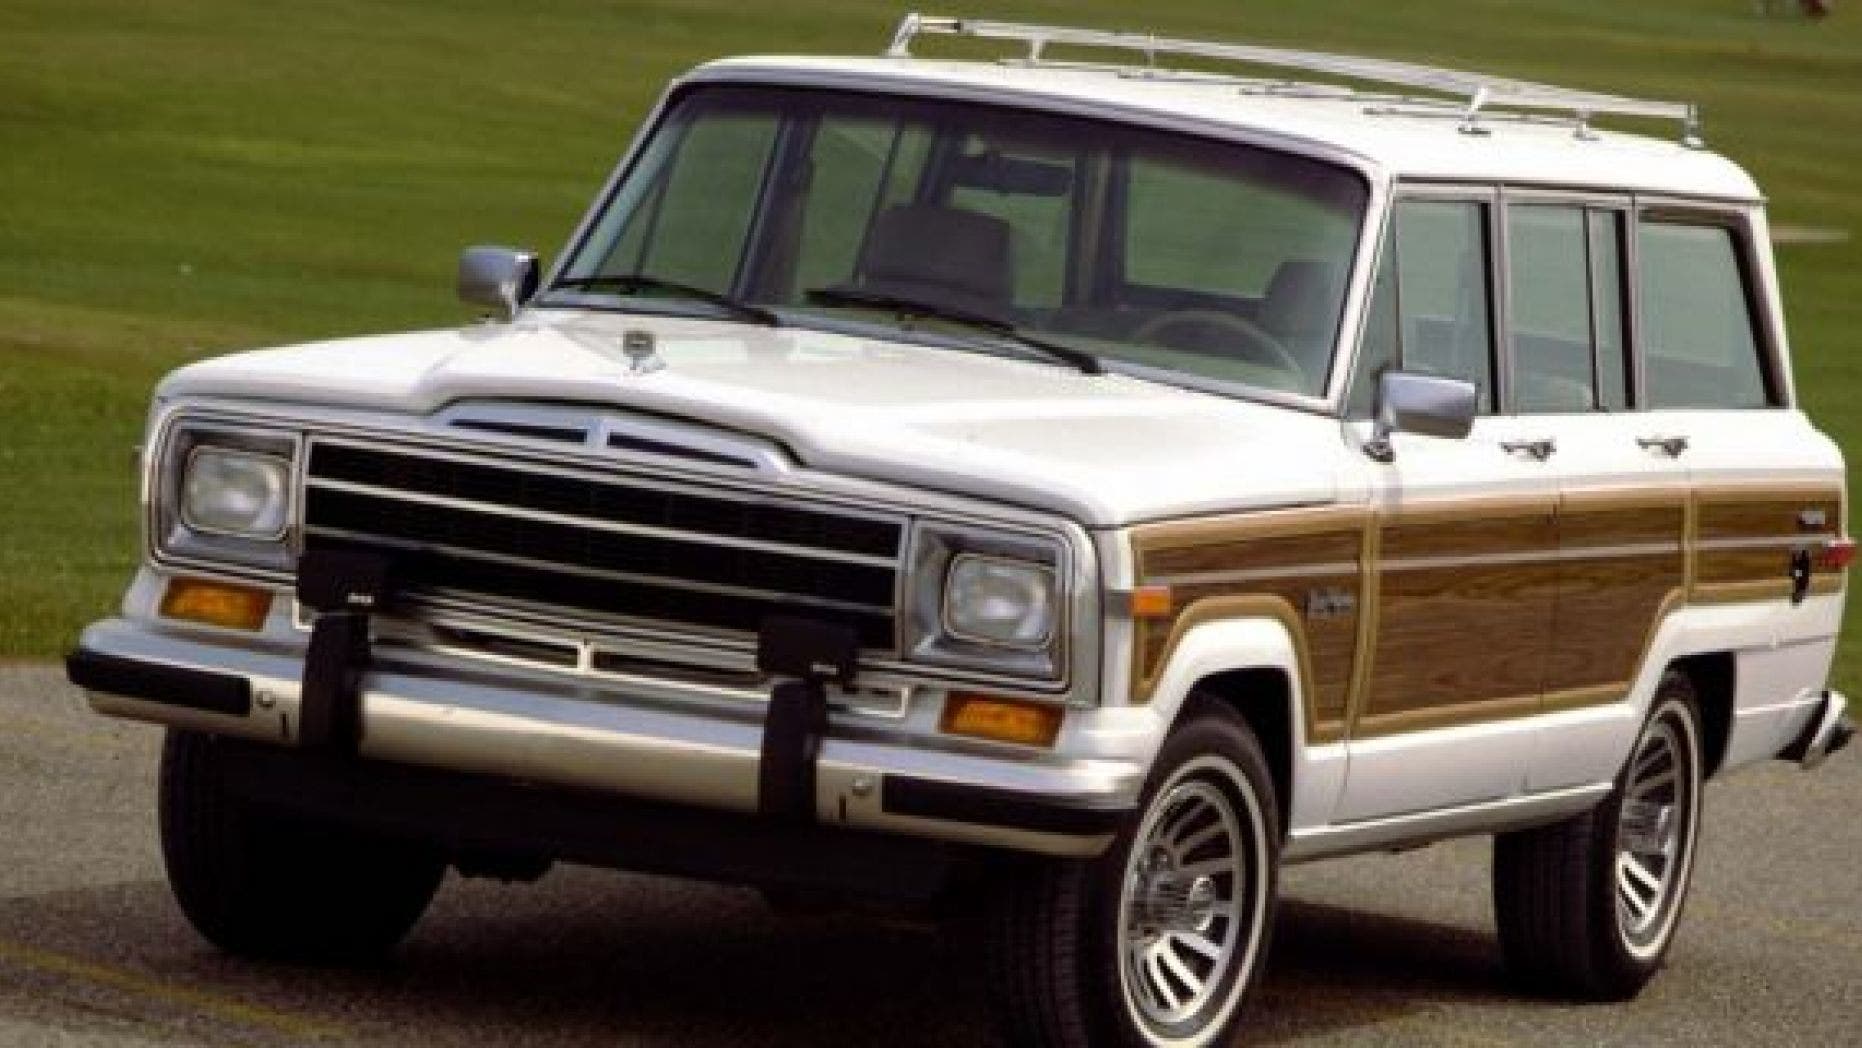 The new Jeep Wagoneer will be a truck-based luxury SUV, just like the original.